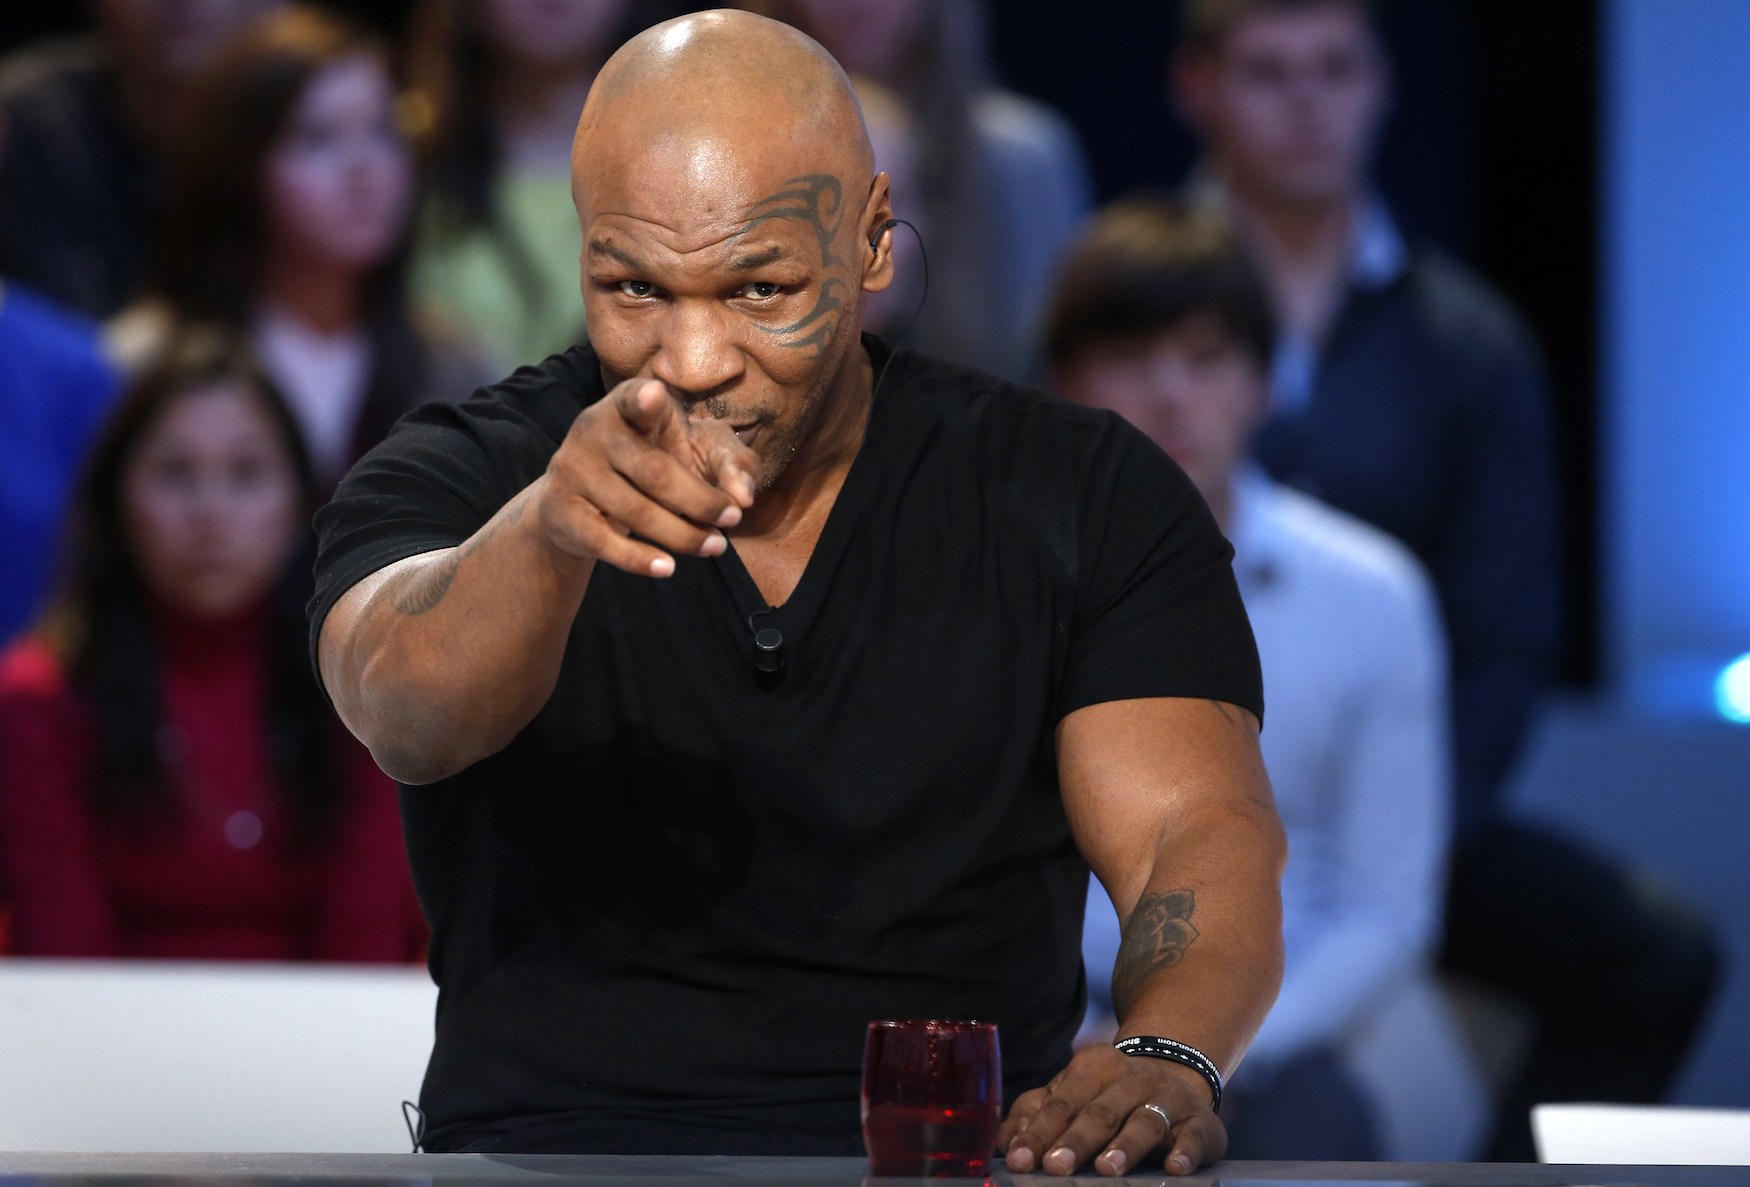 Mike Tyson isn't short on confidence ahead of his comeback bout with Roy Jones Jr.